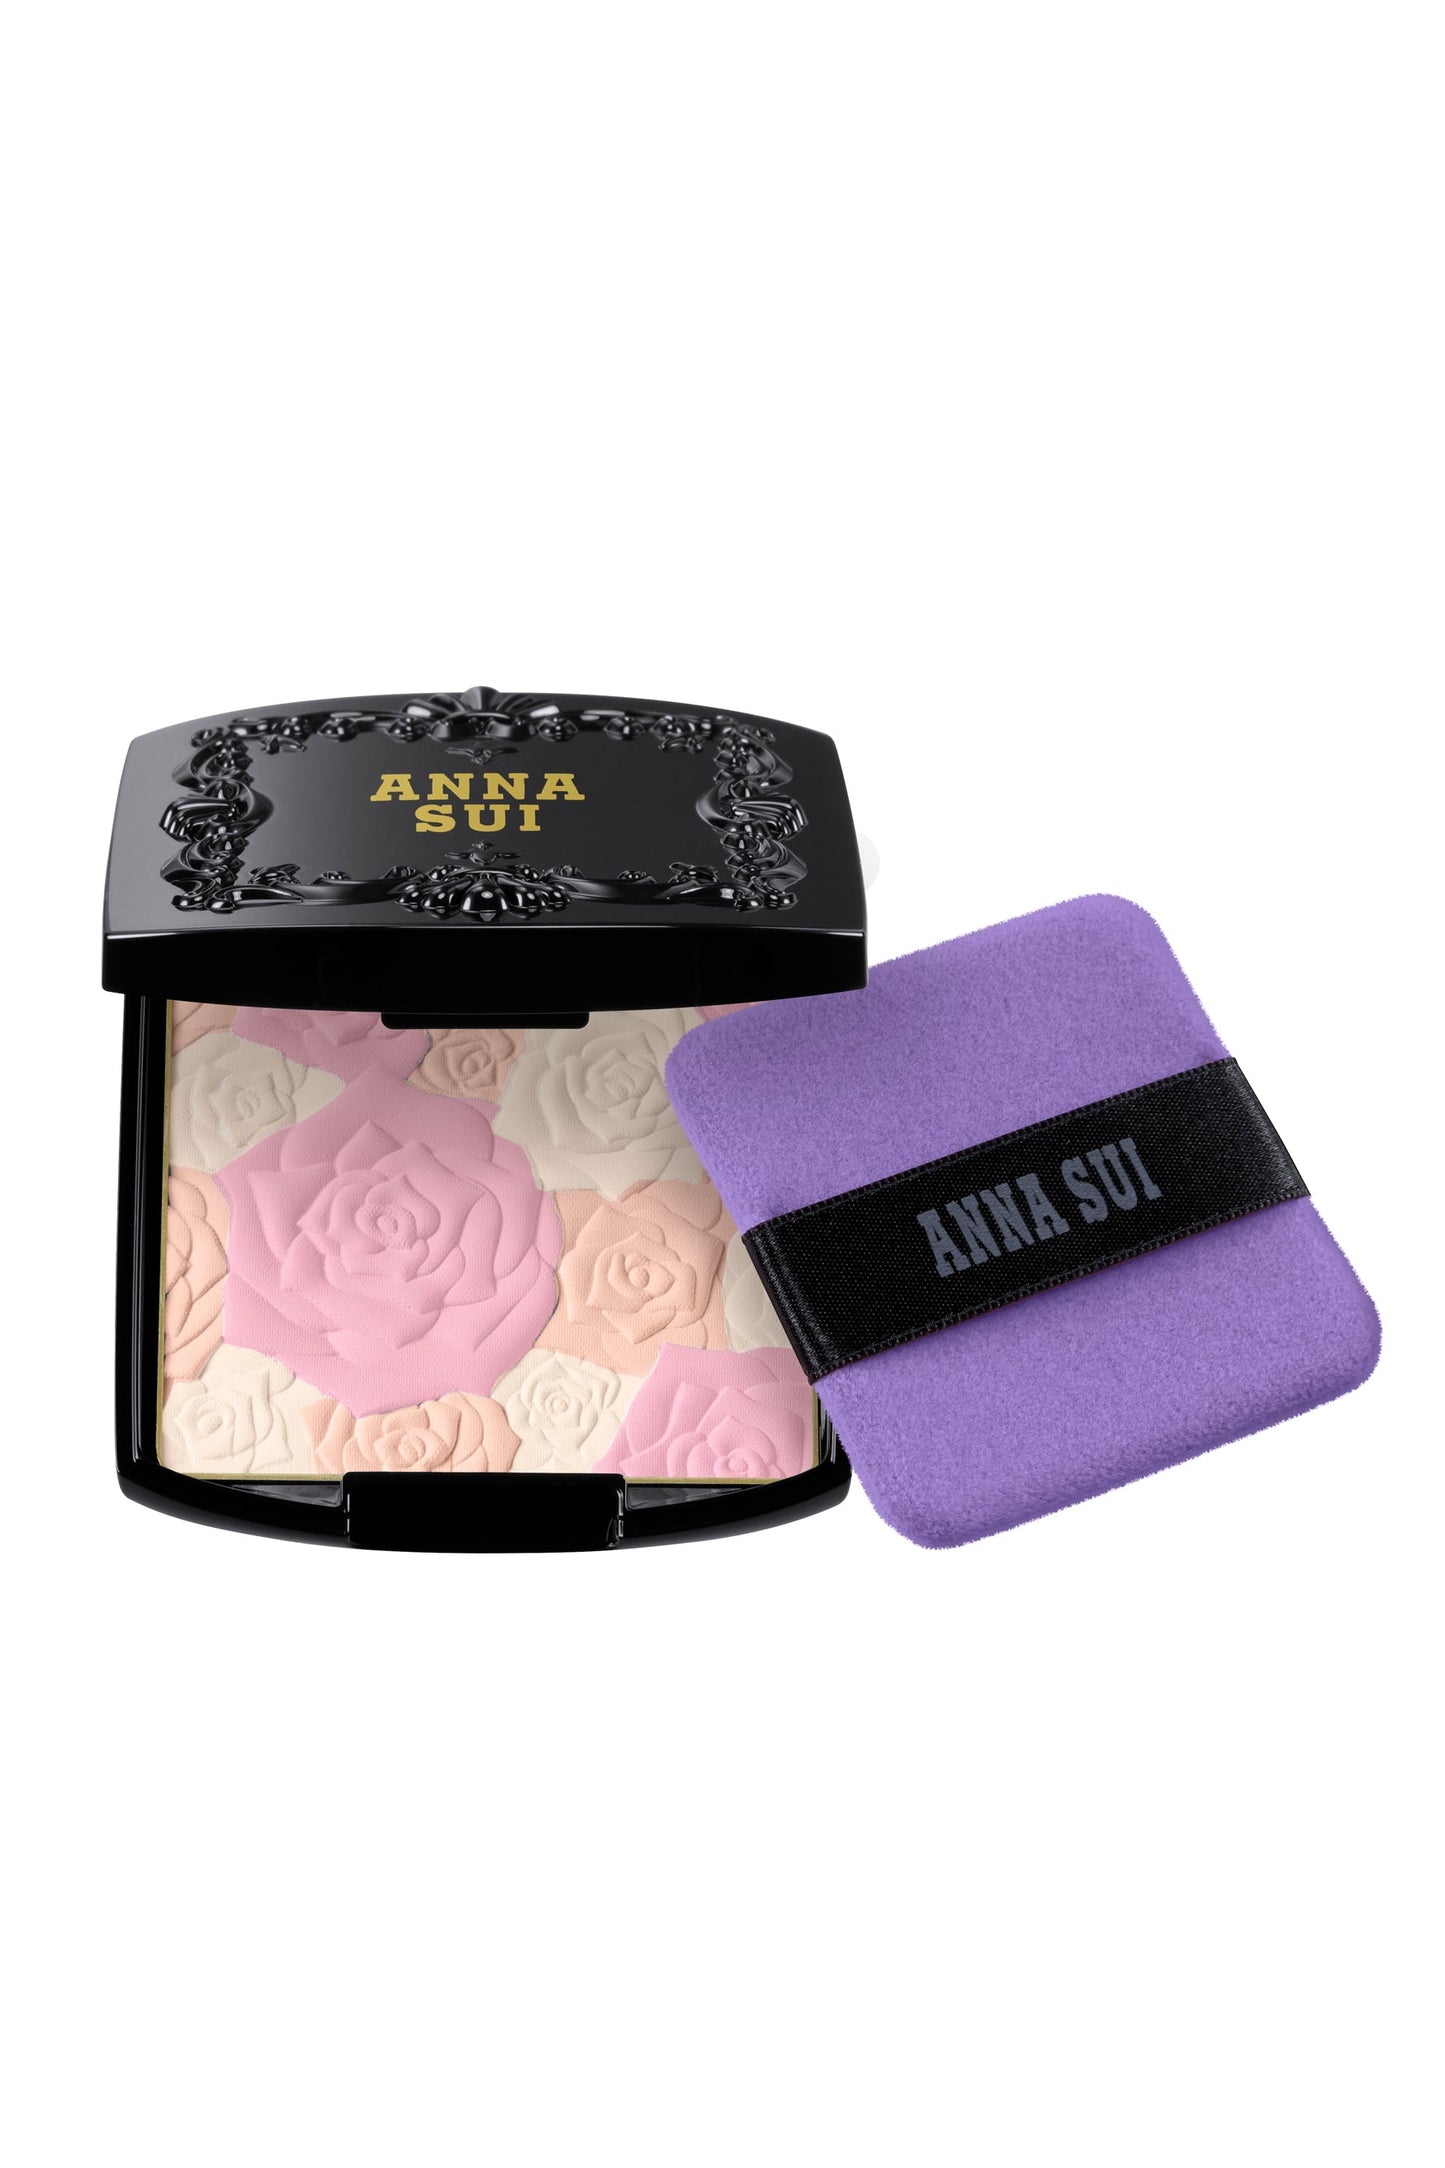 Mini Puff is violet squared pad with rounded corners with a black ribbon to handle it,